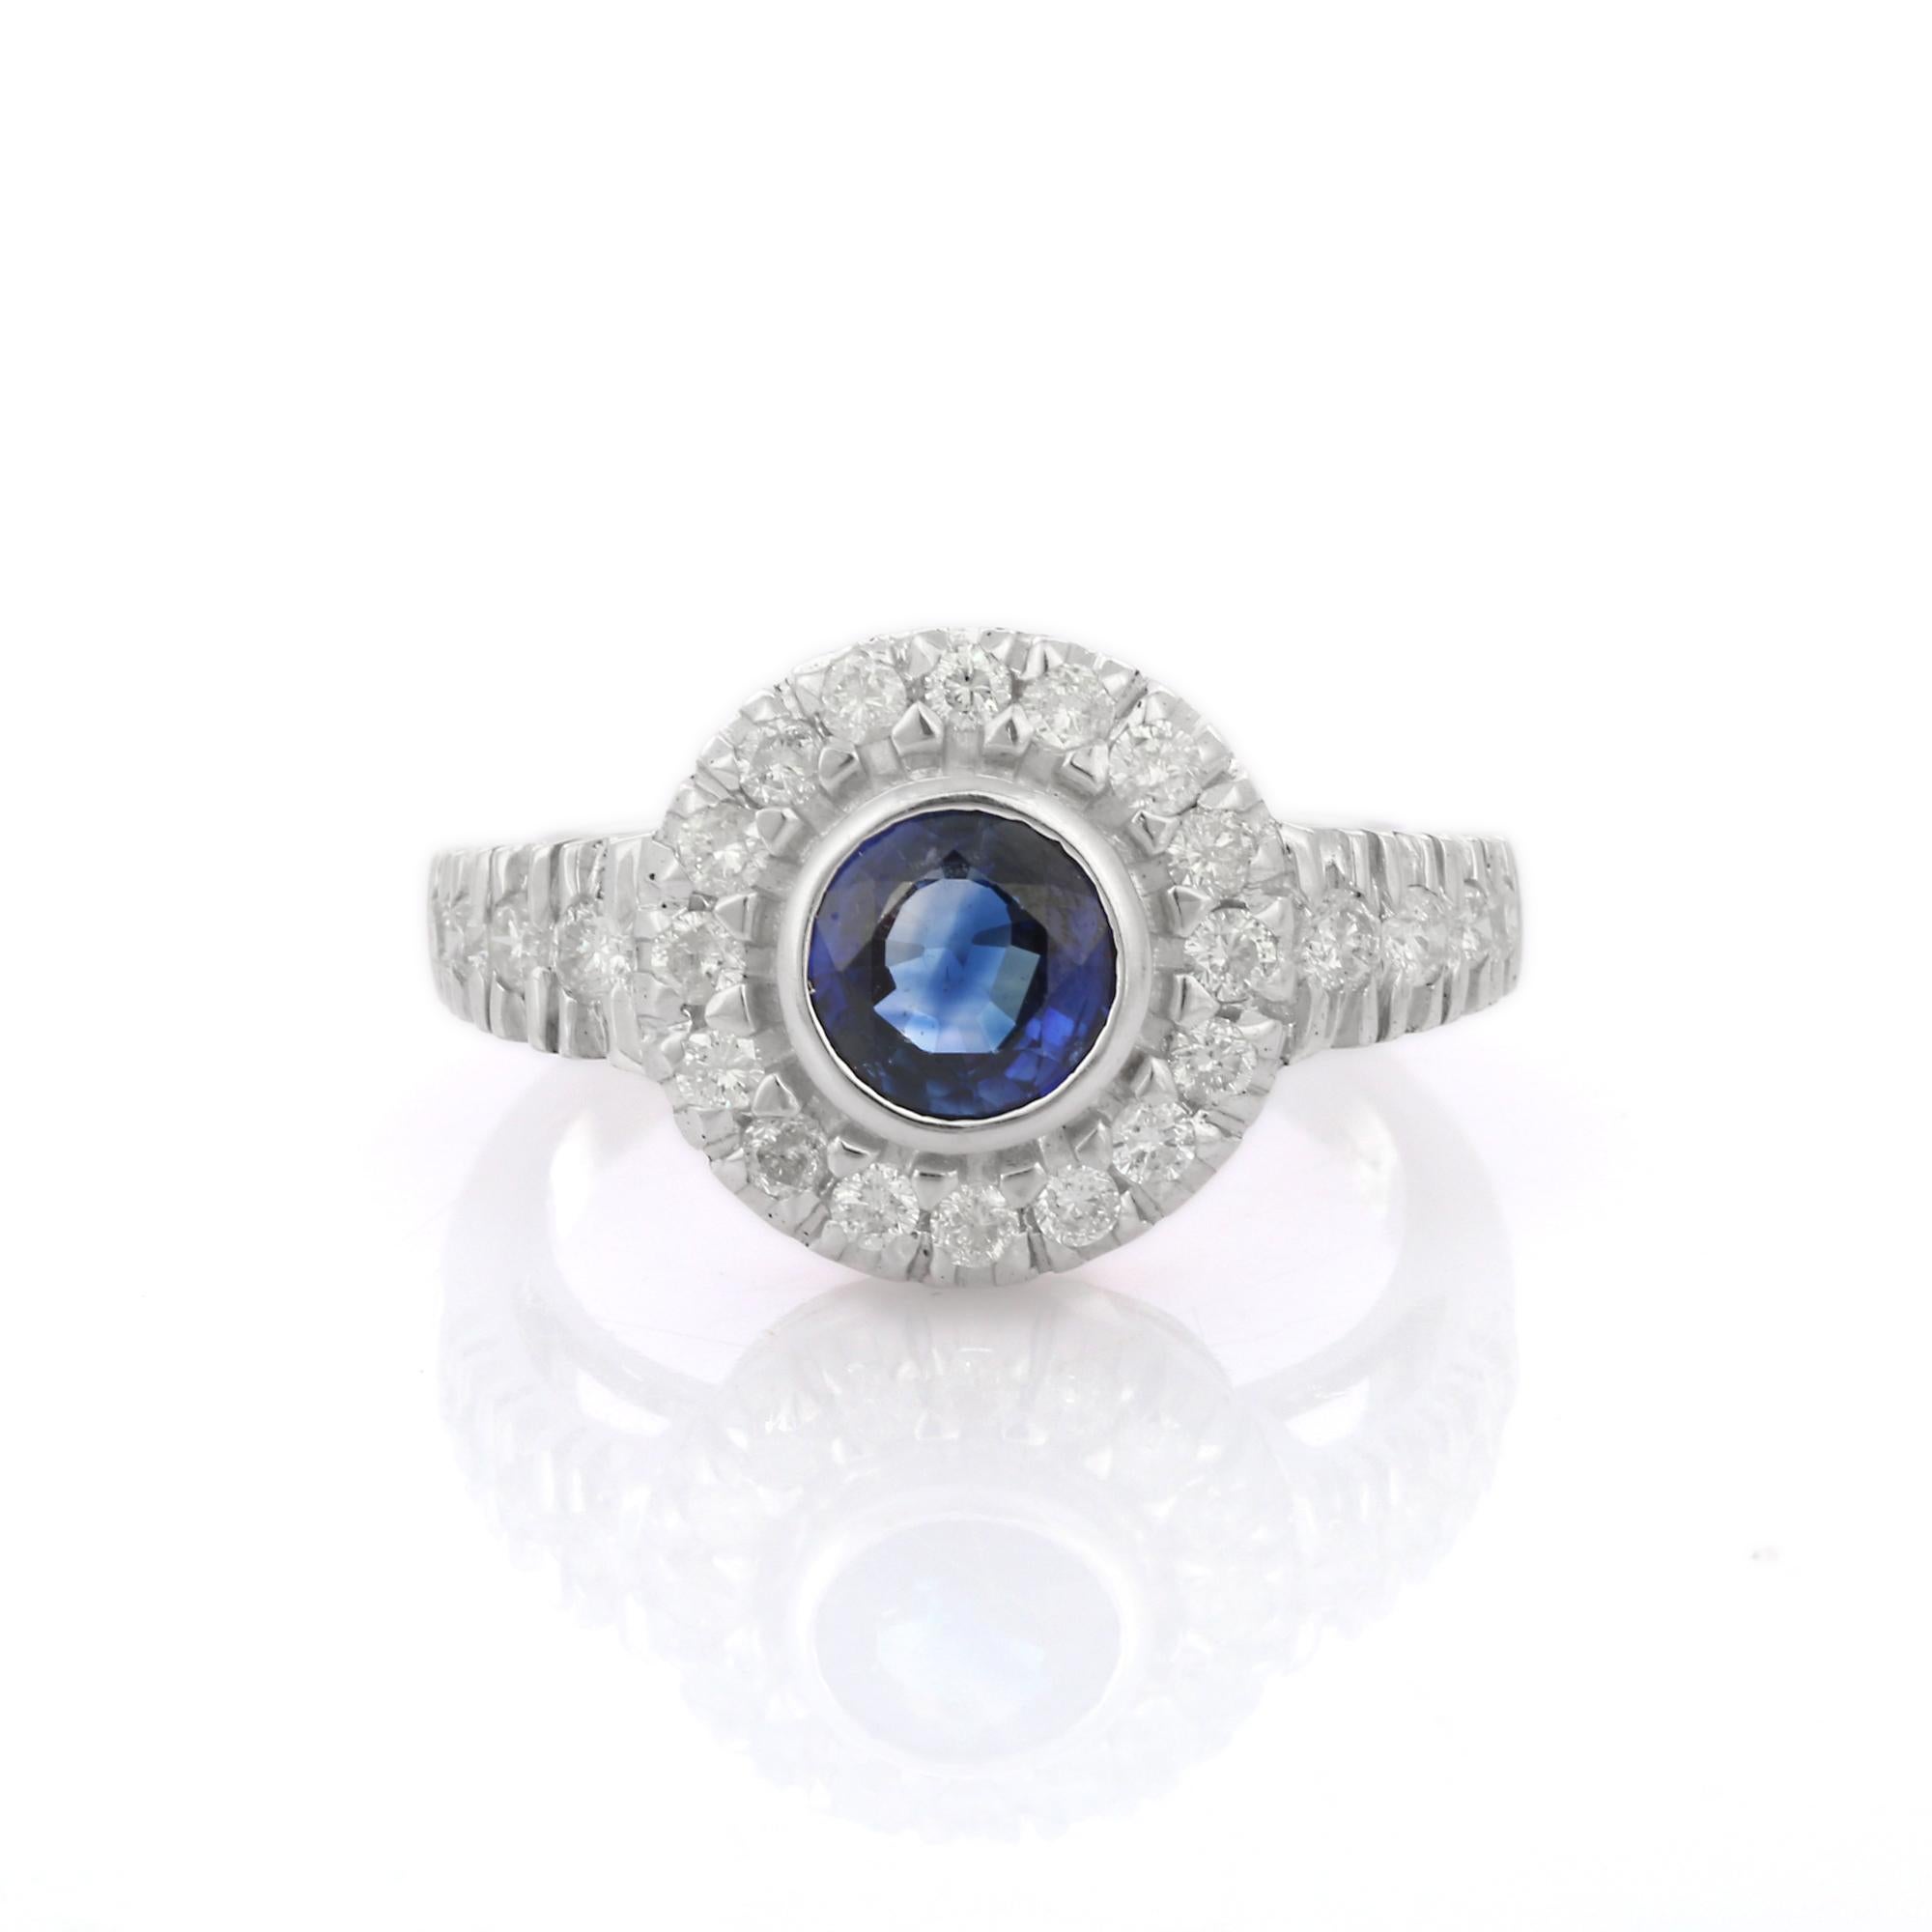 For Sale:  Brilliant 1.15 Ct Round Sapphire with Diamonds Engagement Ring in 18K White Gold 2